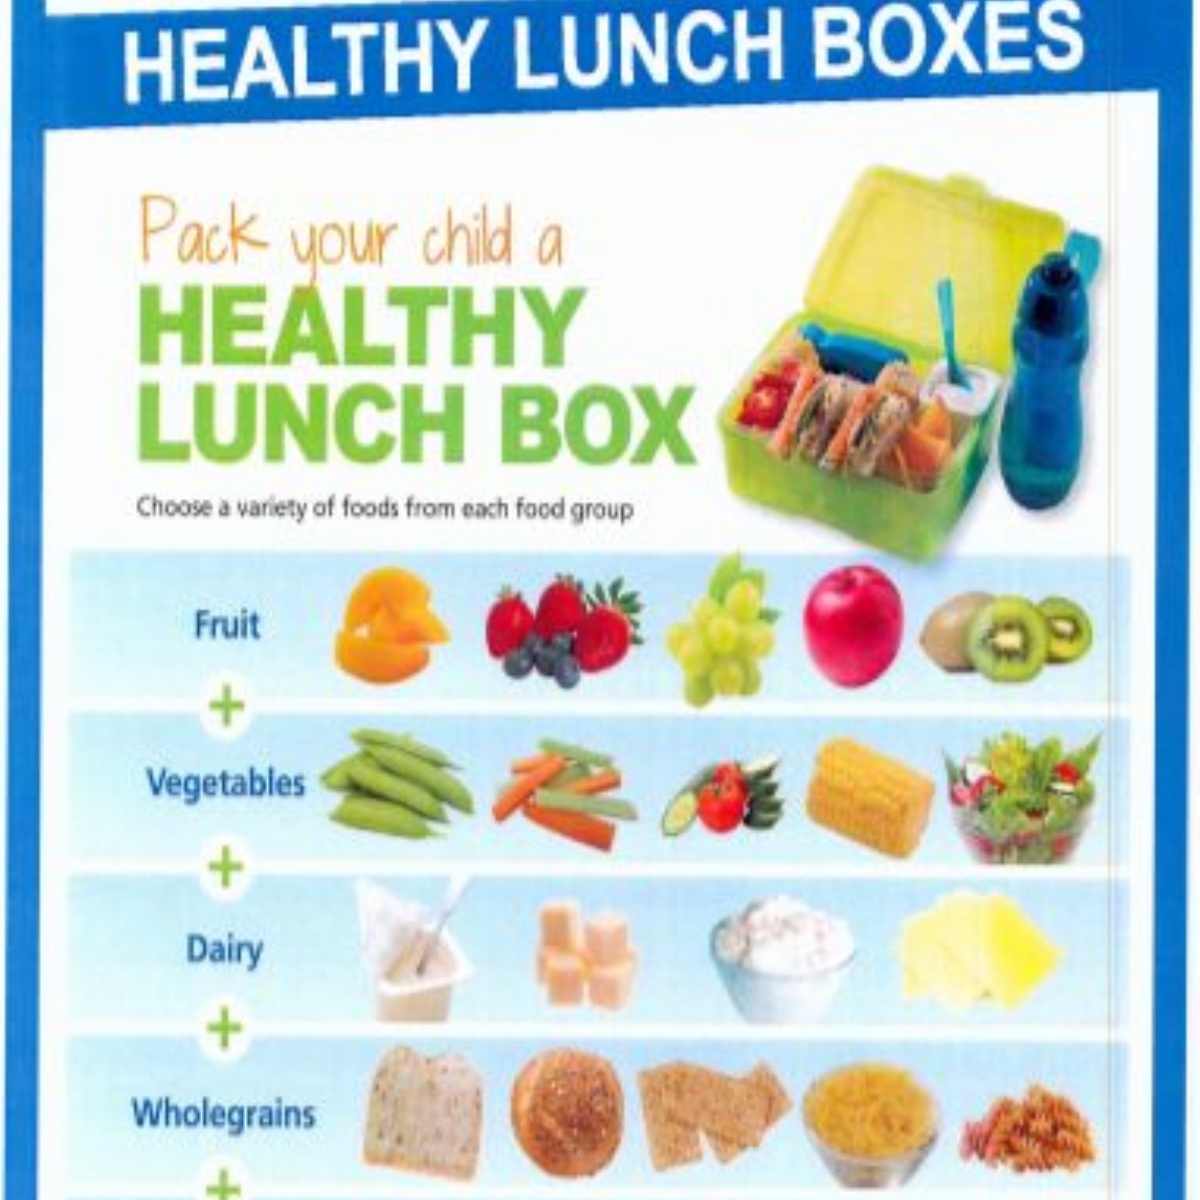 Kingswood Primary Academy - Healthy Lunch Boxes